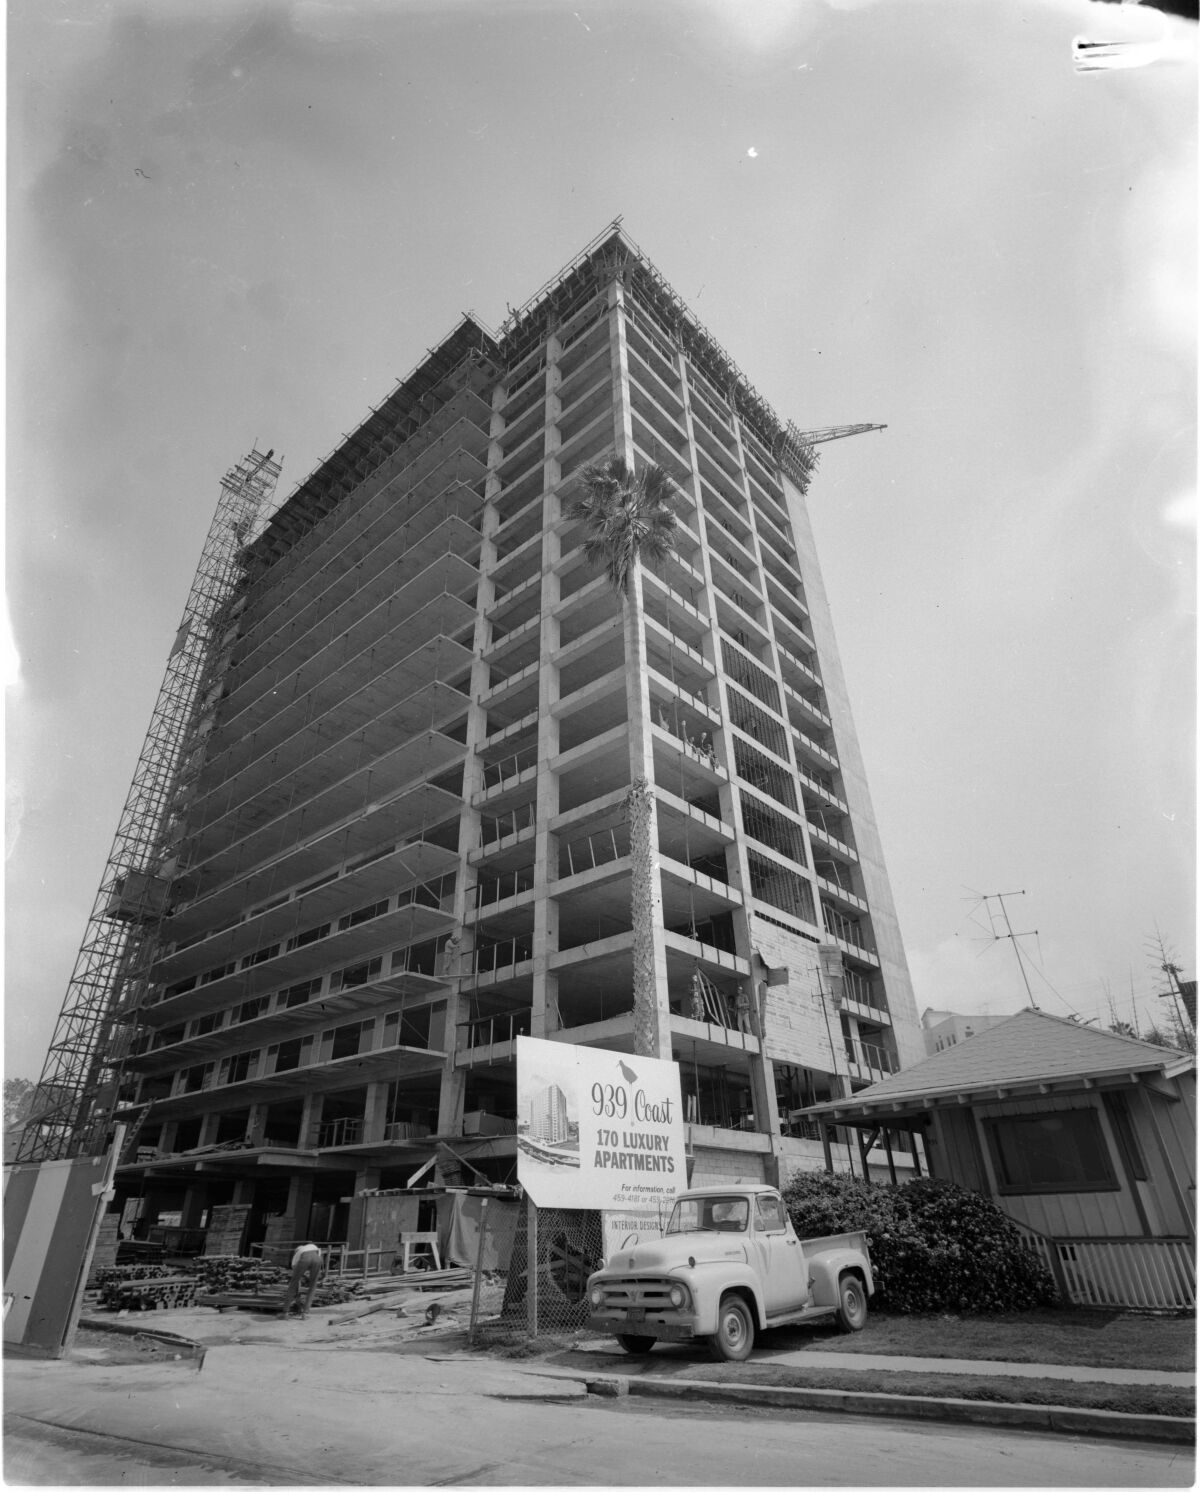 The Huntley Building advertises for wealthy tenants while still under construction in 1964.